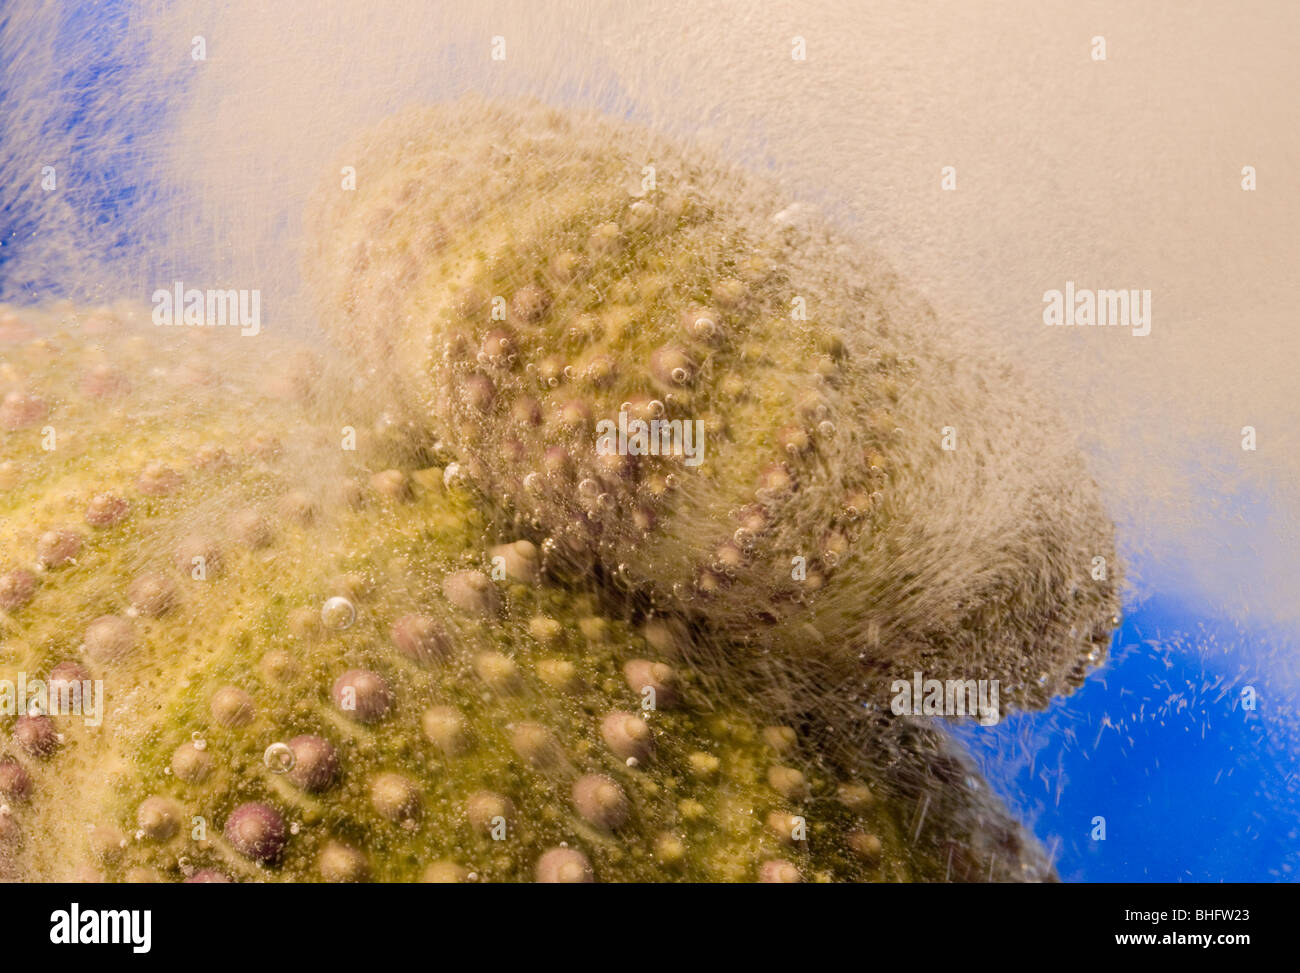 abstract background of urchin and sea water Stock Photo